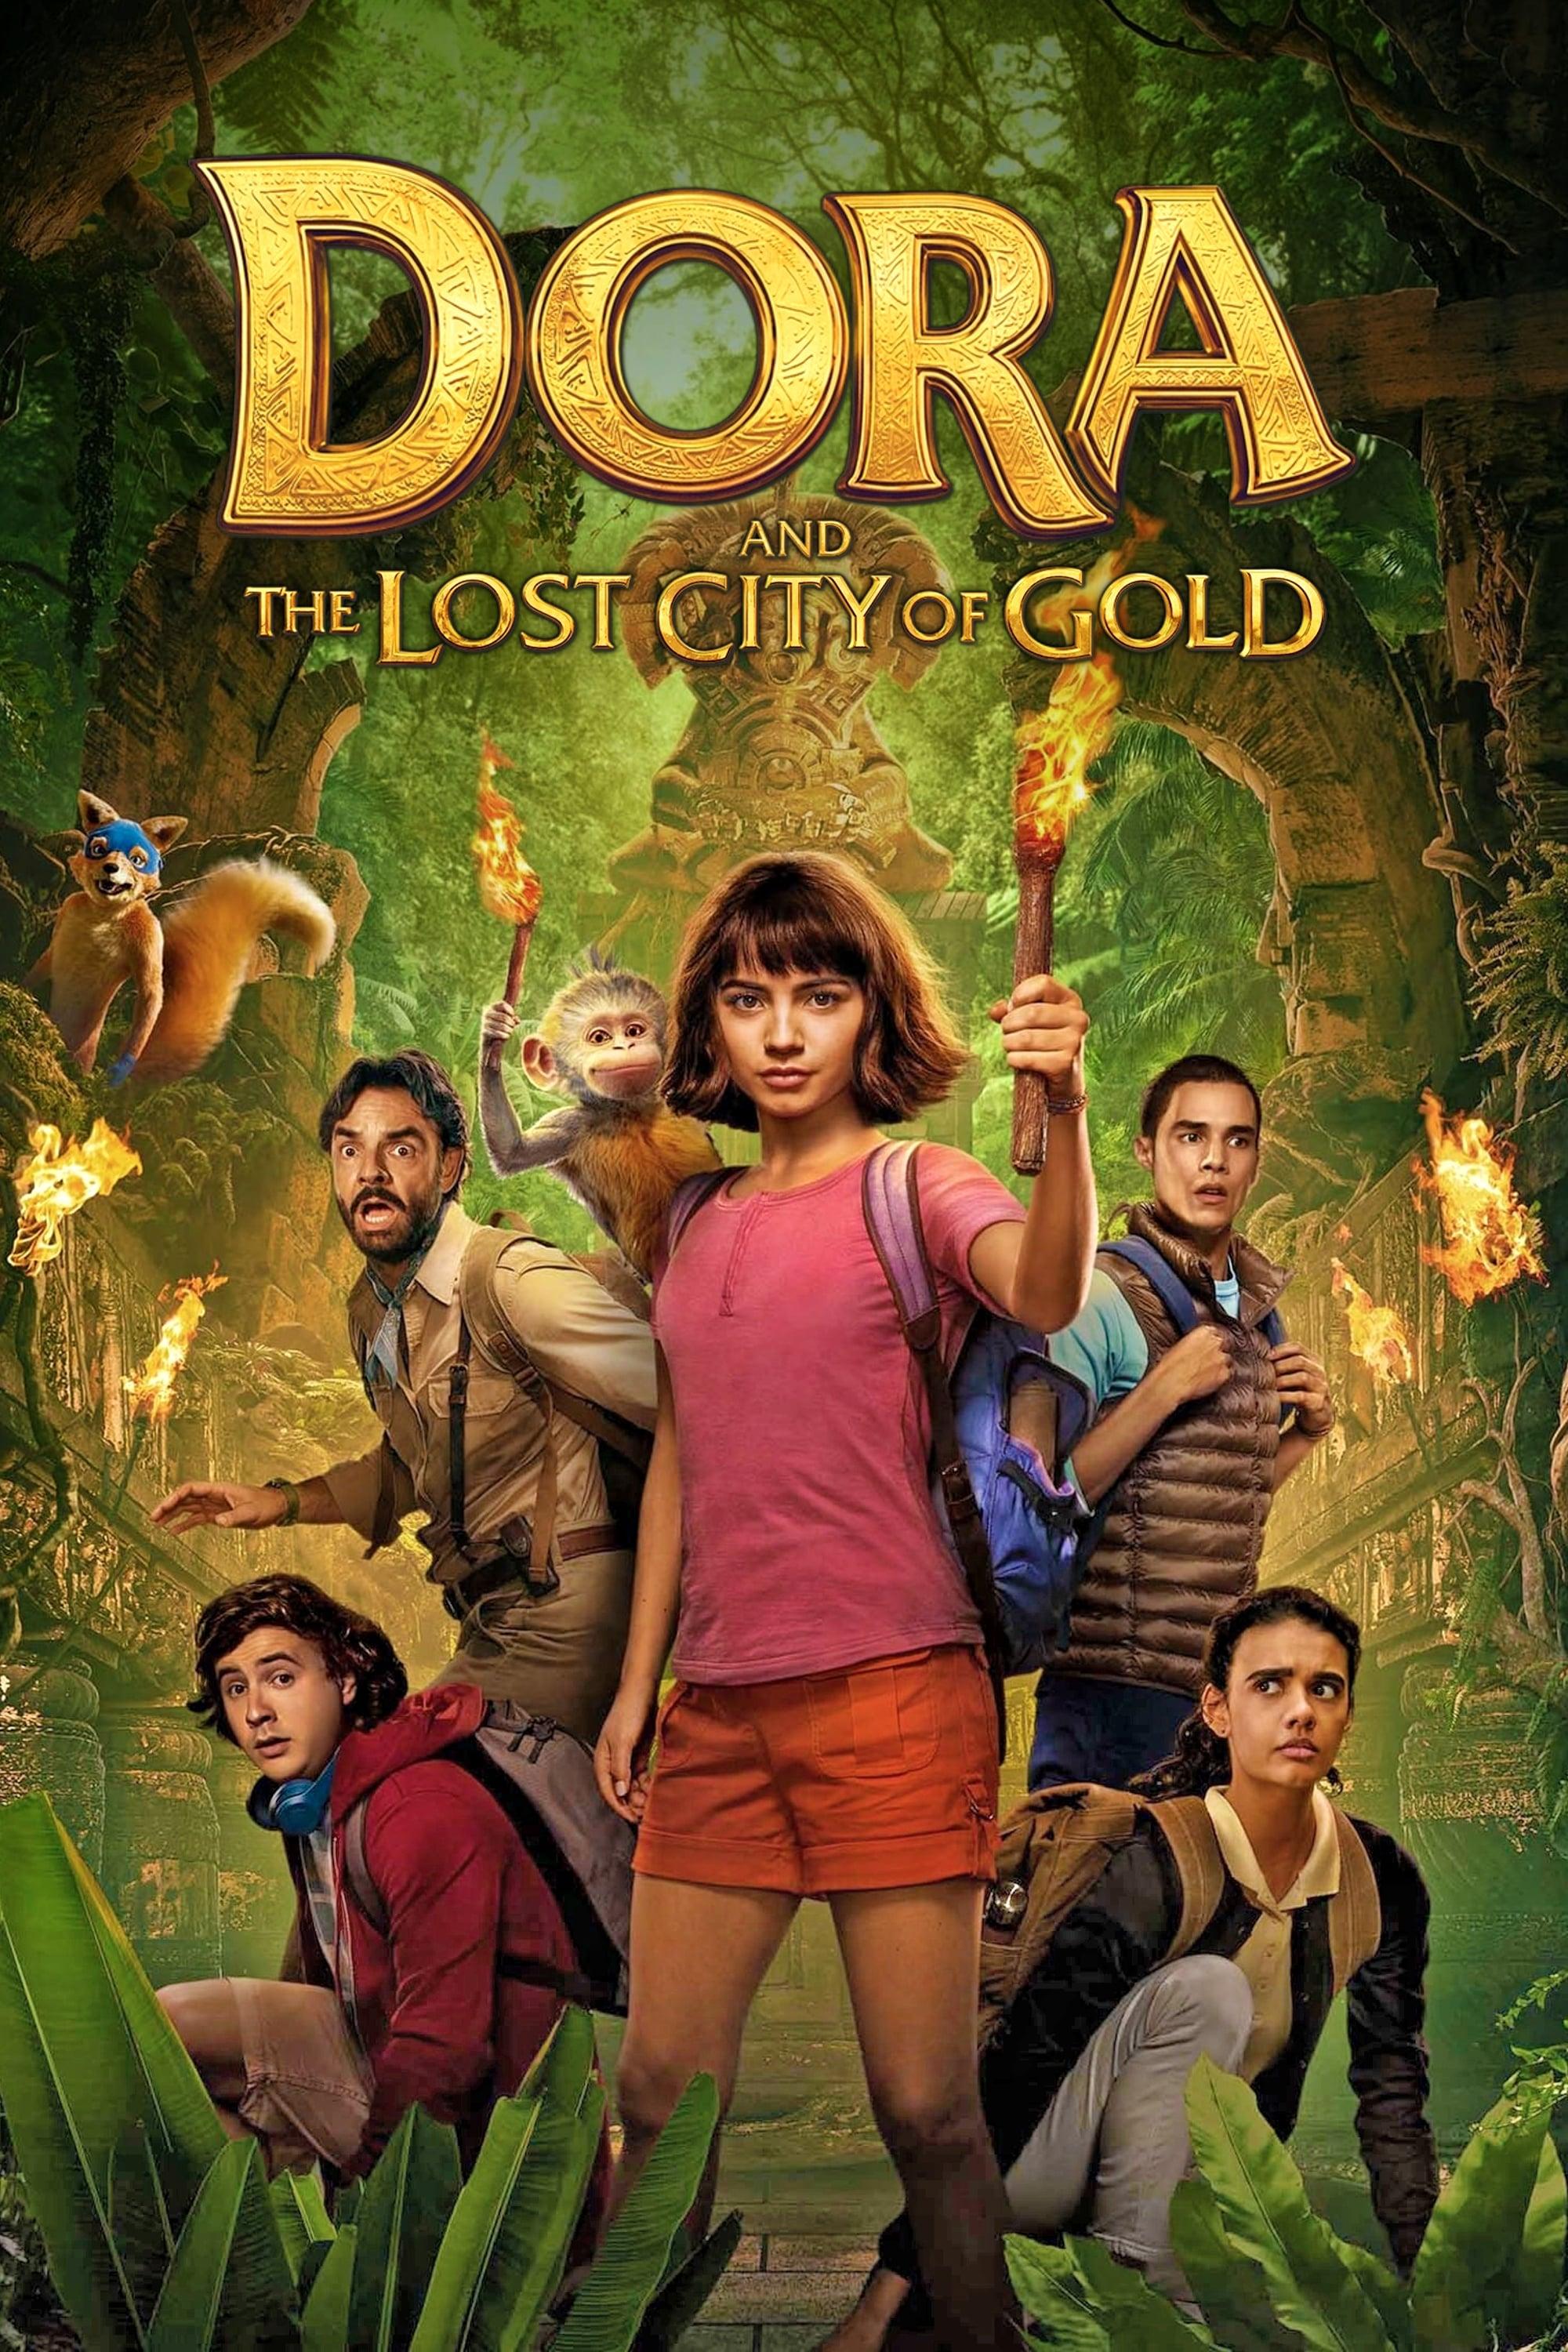 Dora and the Lost City of Gold poster